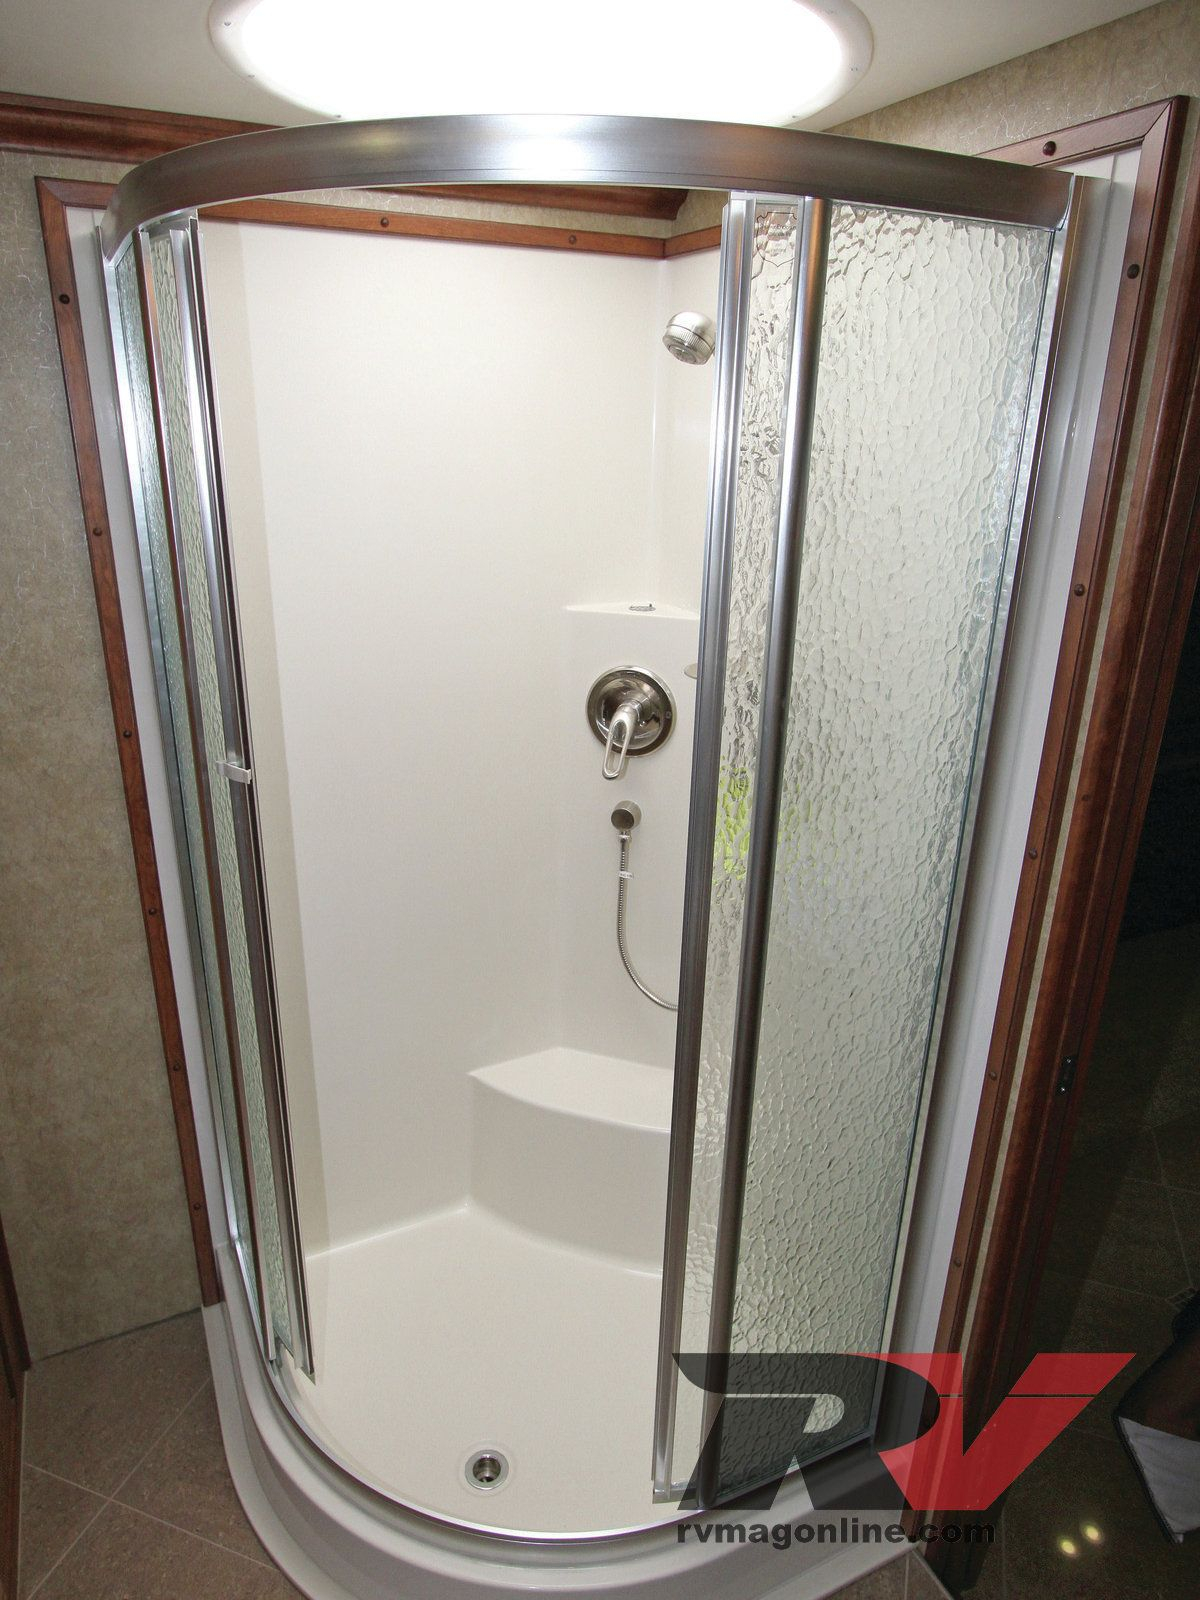 Rv Shower Enclosure America Small Bathrooms Shower Doors throughout proportions 1200 X 1600